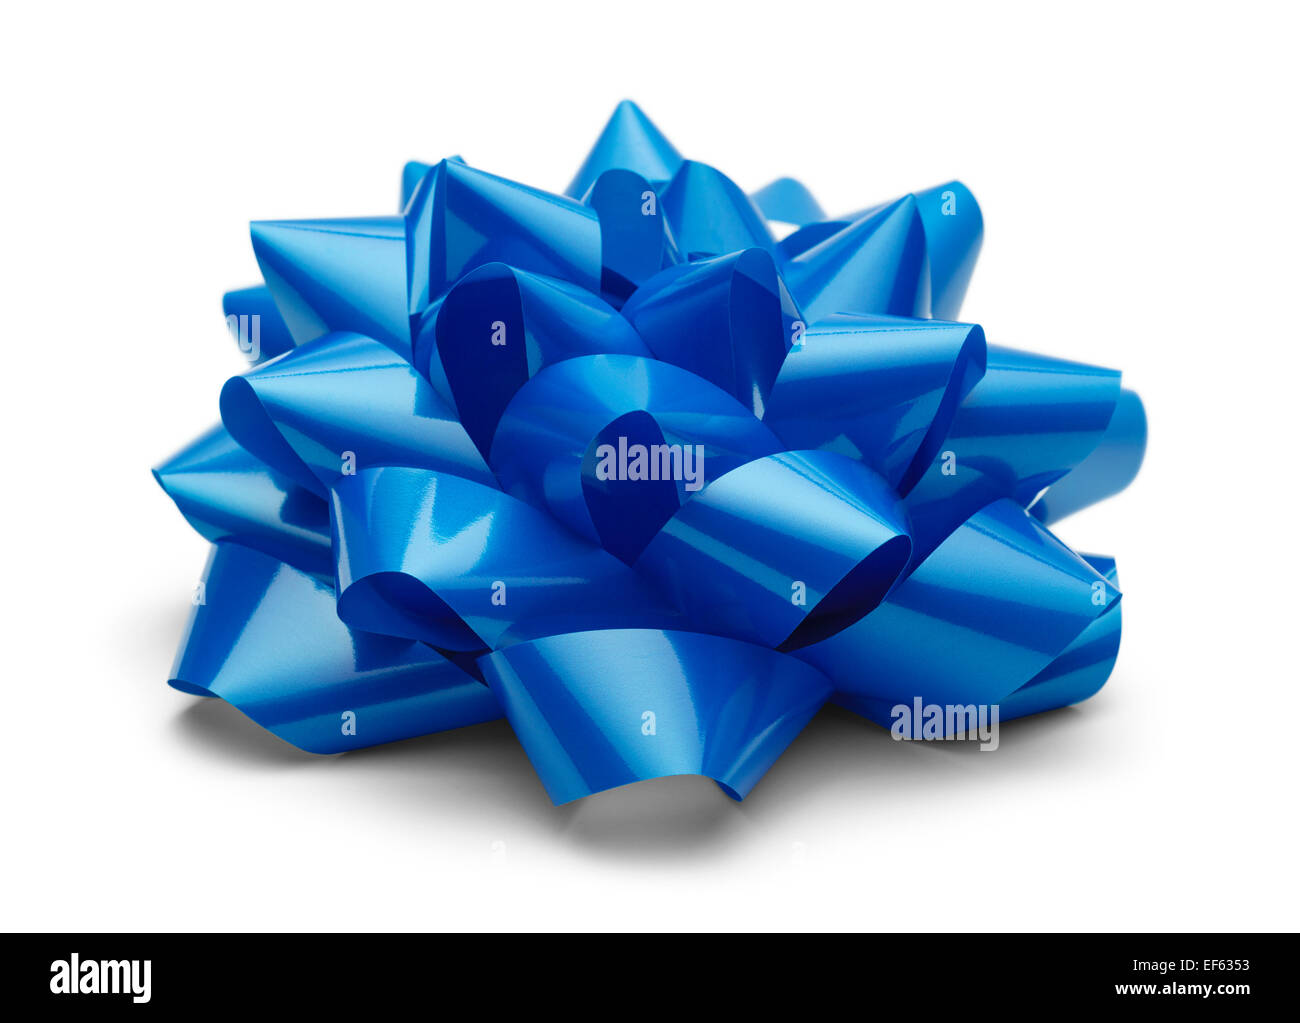 Blue Satin Bow Side View Isolated on White Background. Stock Photo